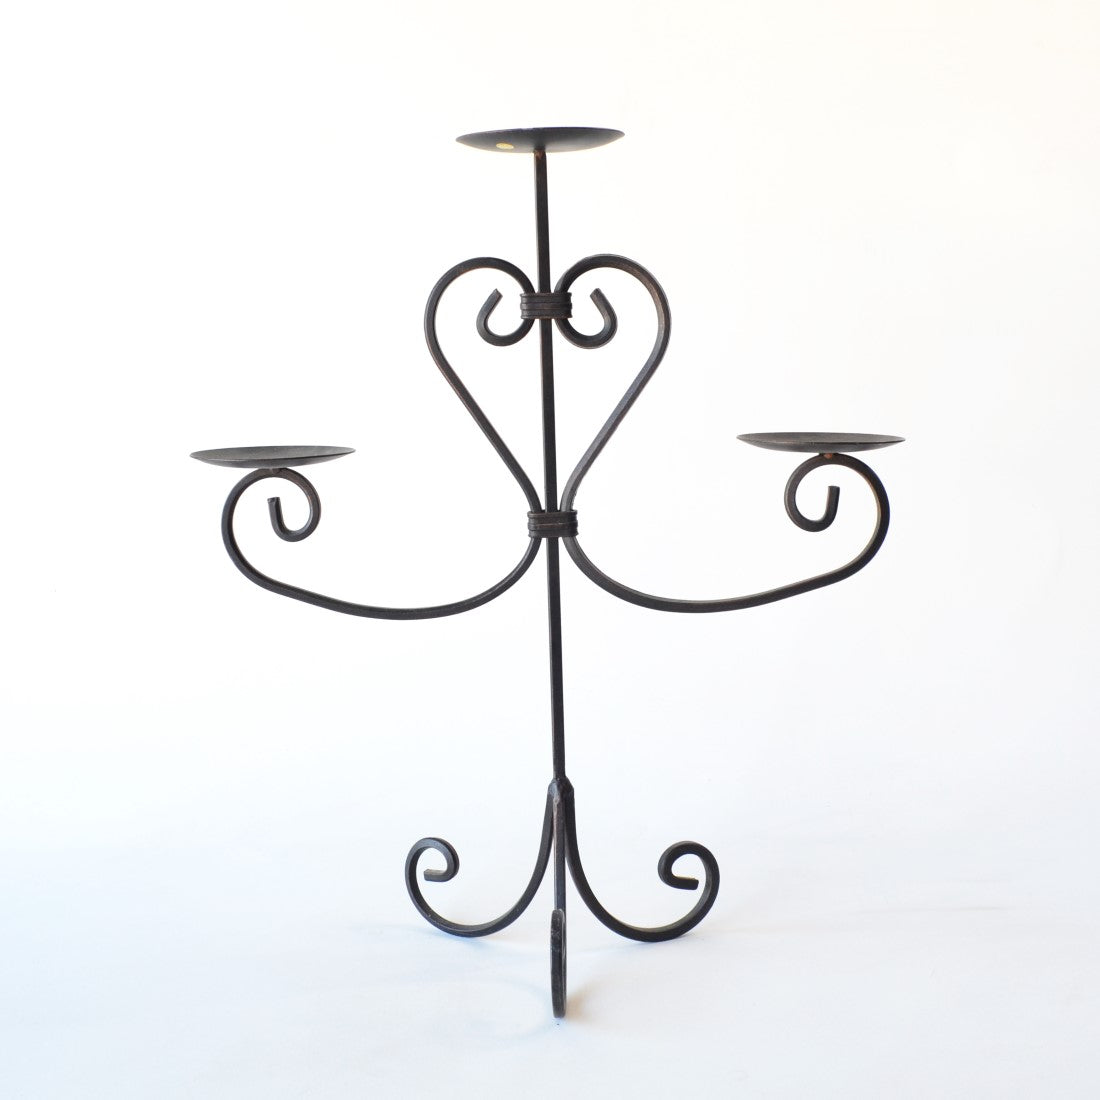 3 Tier Metal Candle Holder For 3" Pillar Candles - Scroll Heart Design - 21" Tall